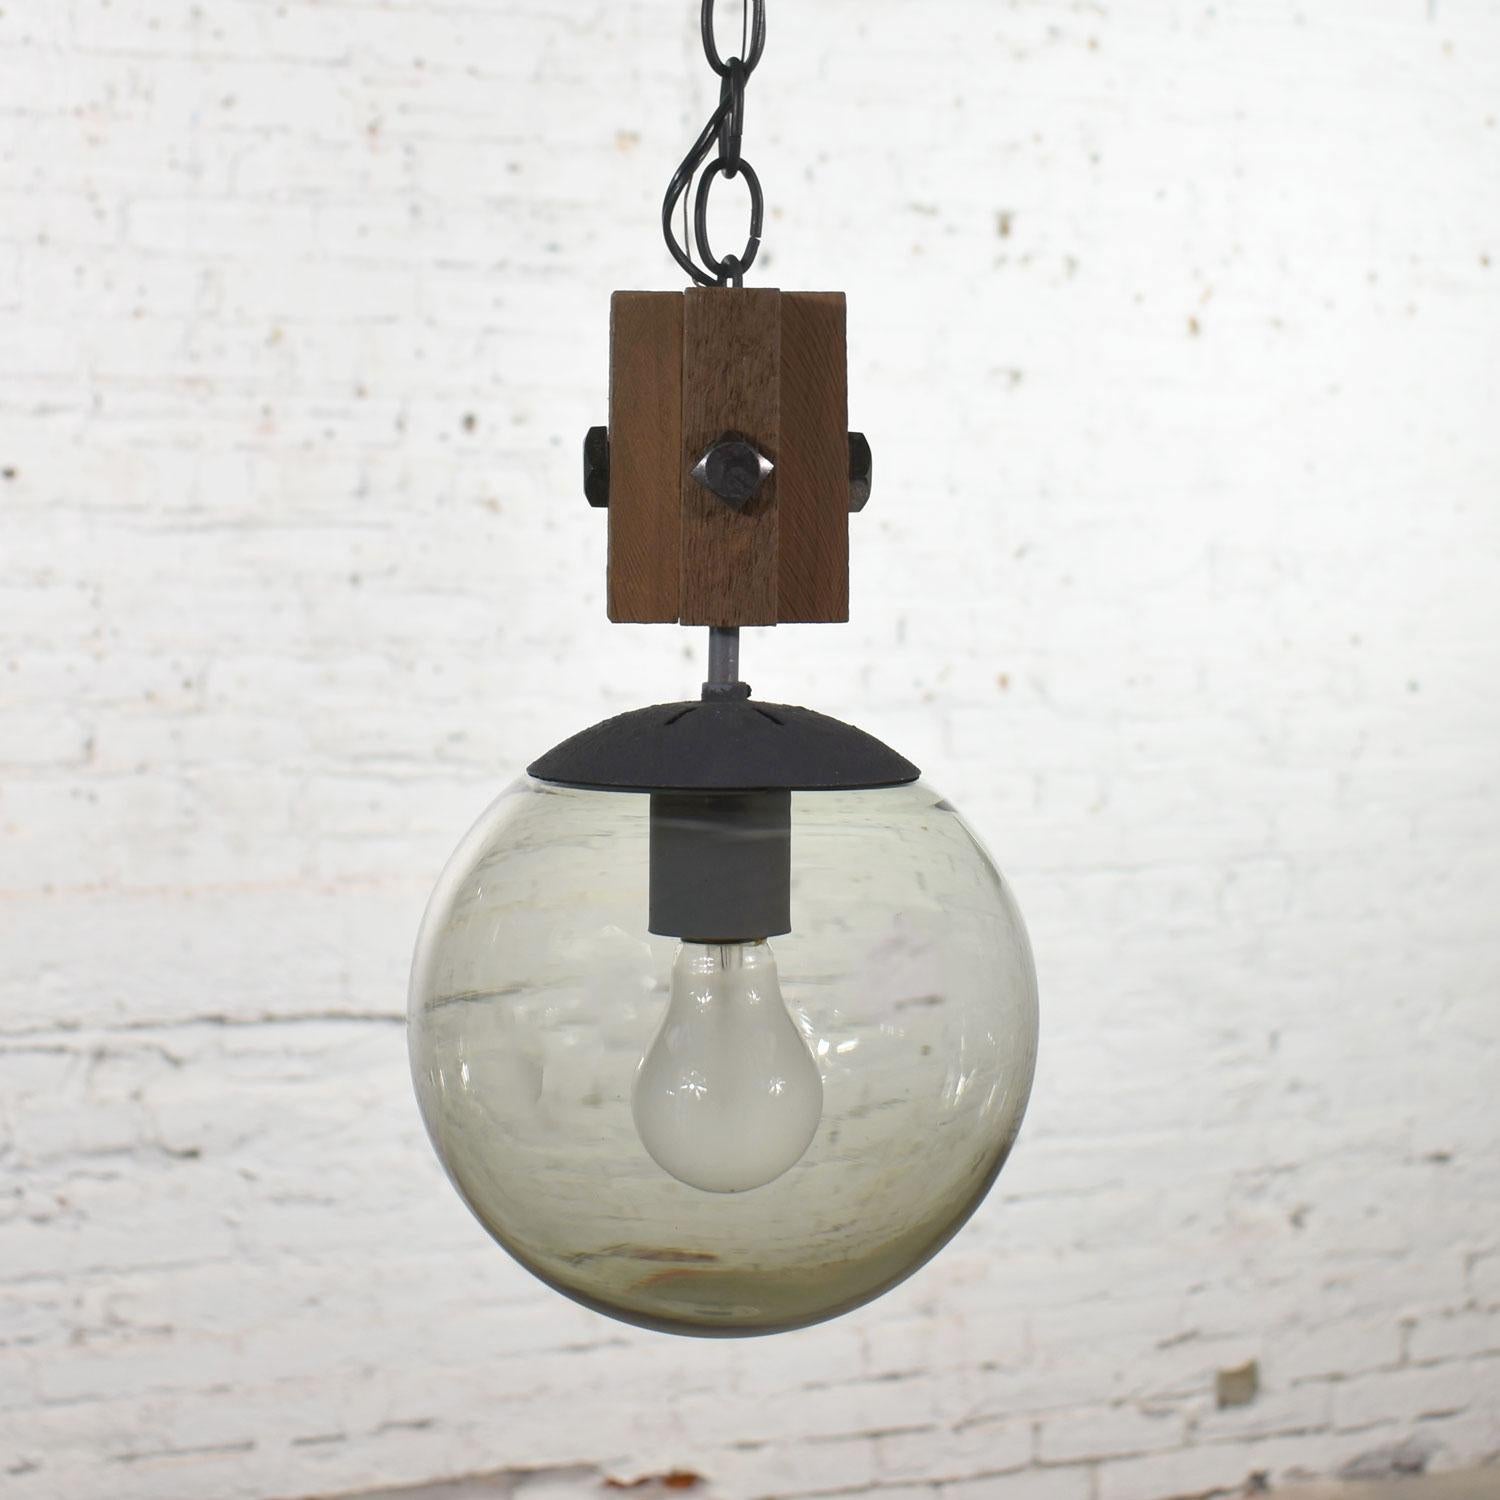 Brutalist Mid-Century Modern NOS Wood and Smoked Glass Globe Pendant Light Black Chain For Sale